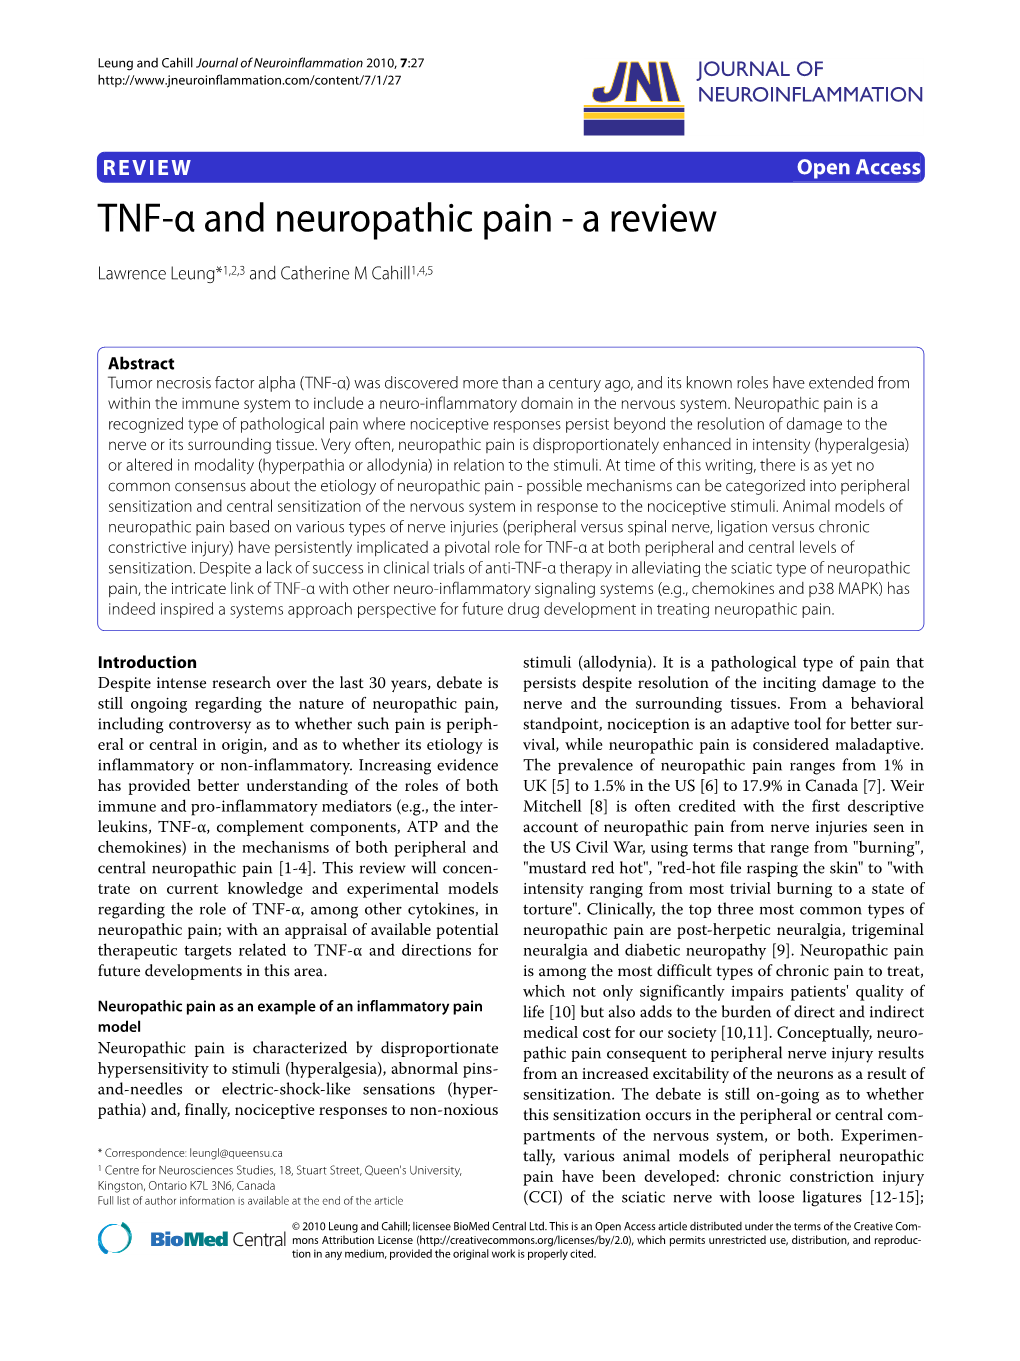 TNF-Α and Neuropathic Pain